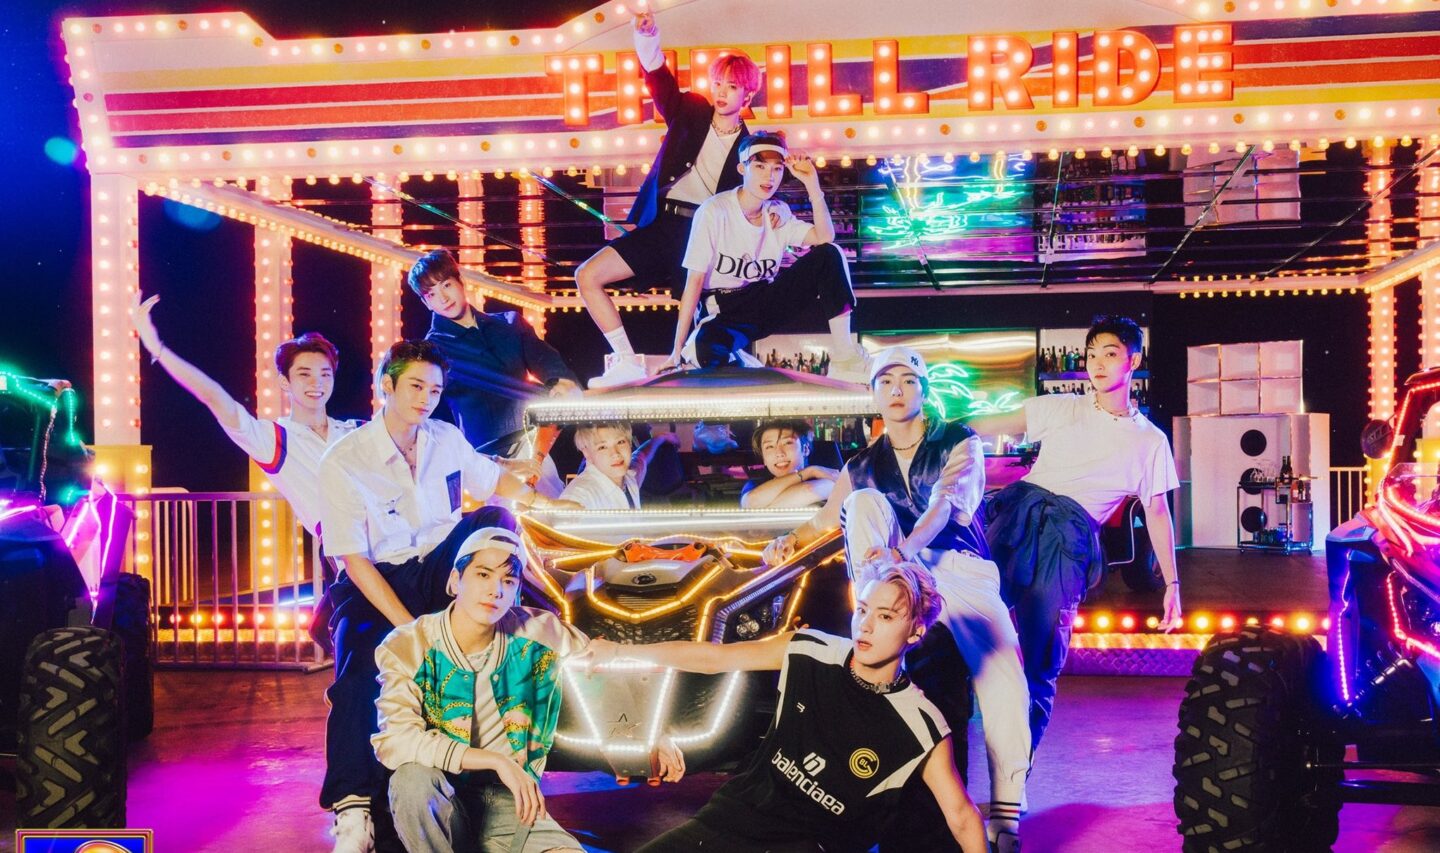 T munching kanal The Boyz Are Boys No More in “Thrill Ride” – Seoulbeats